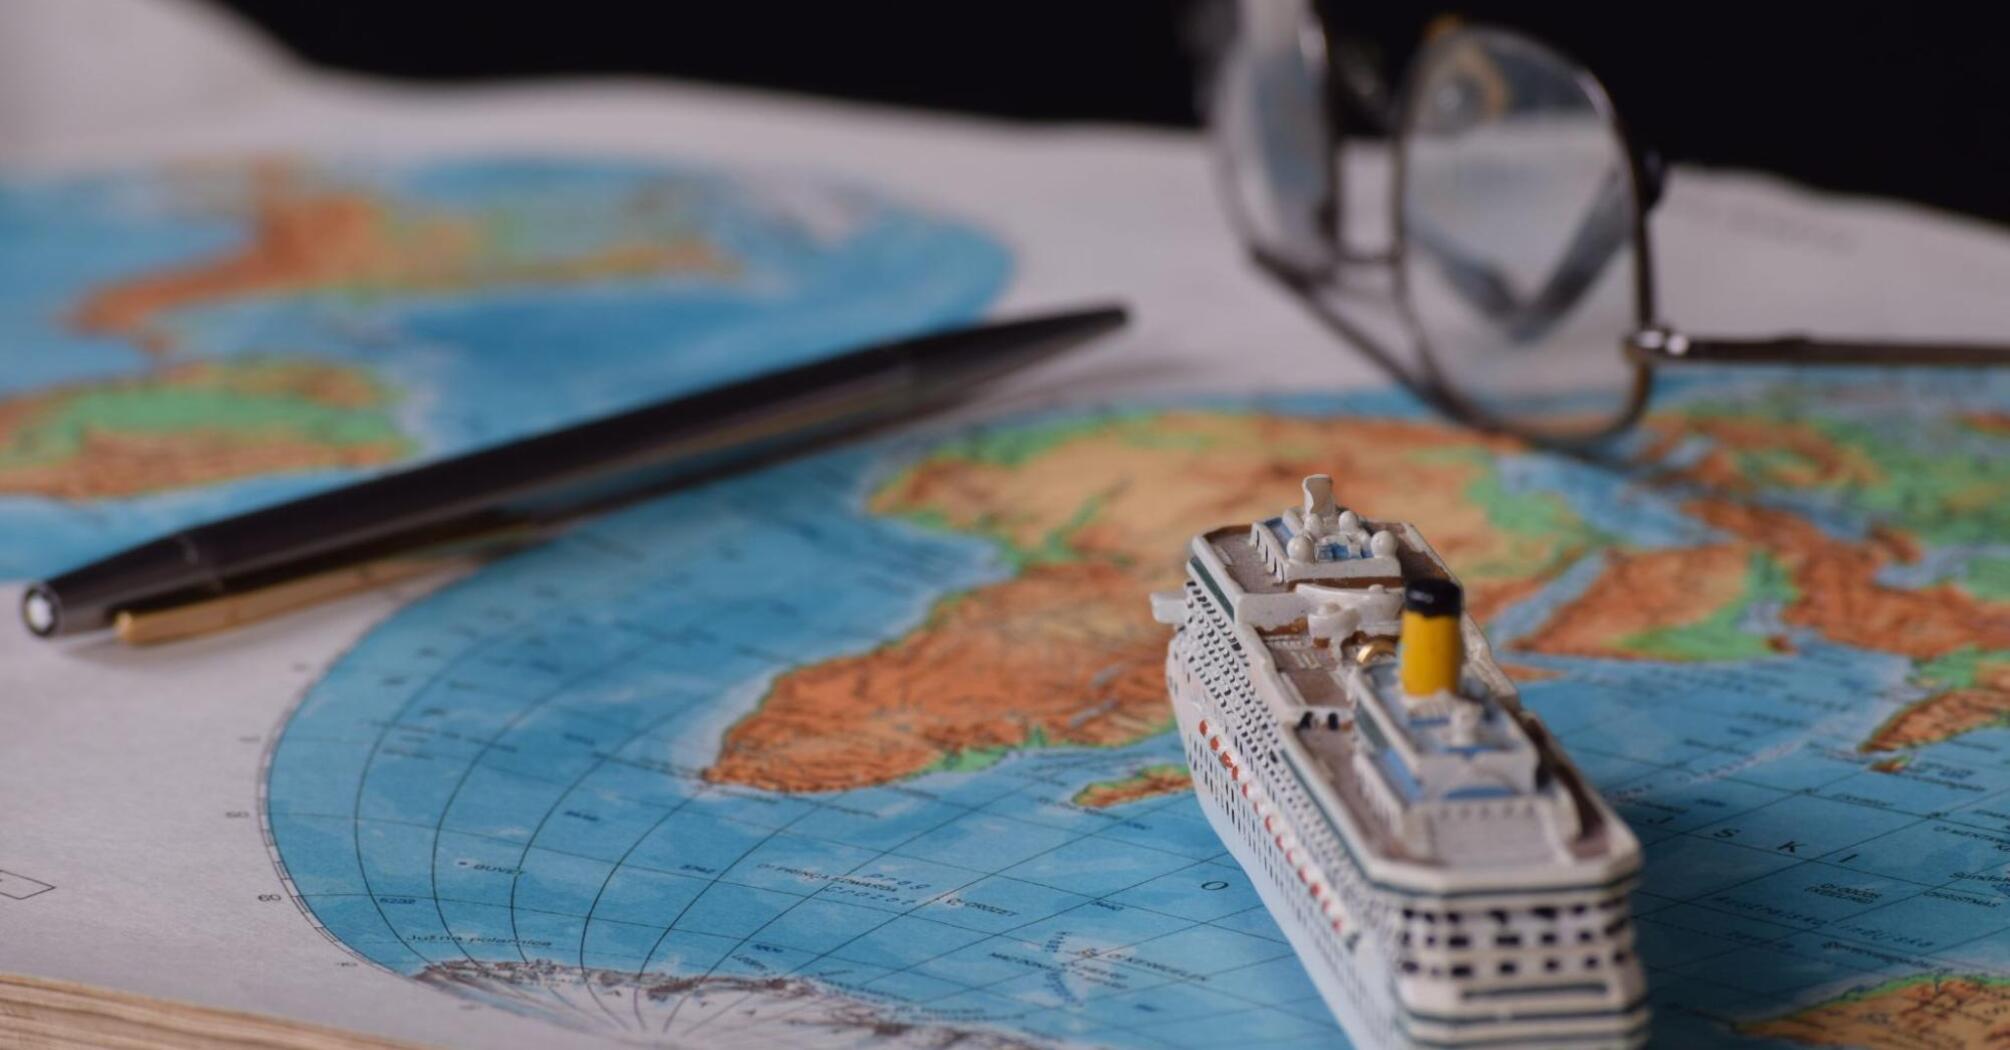 Small toy boat on the background of a world map